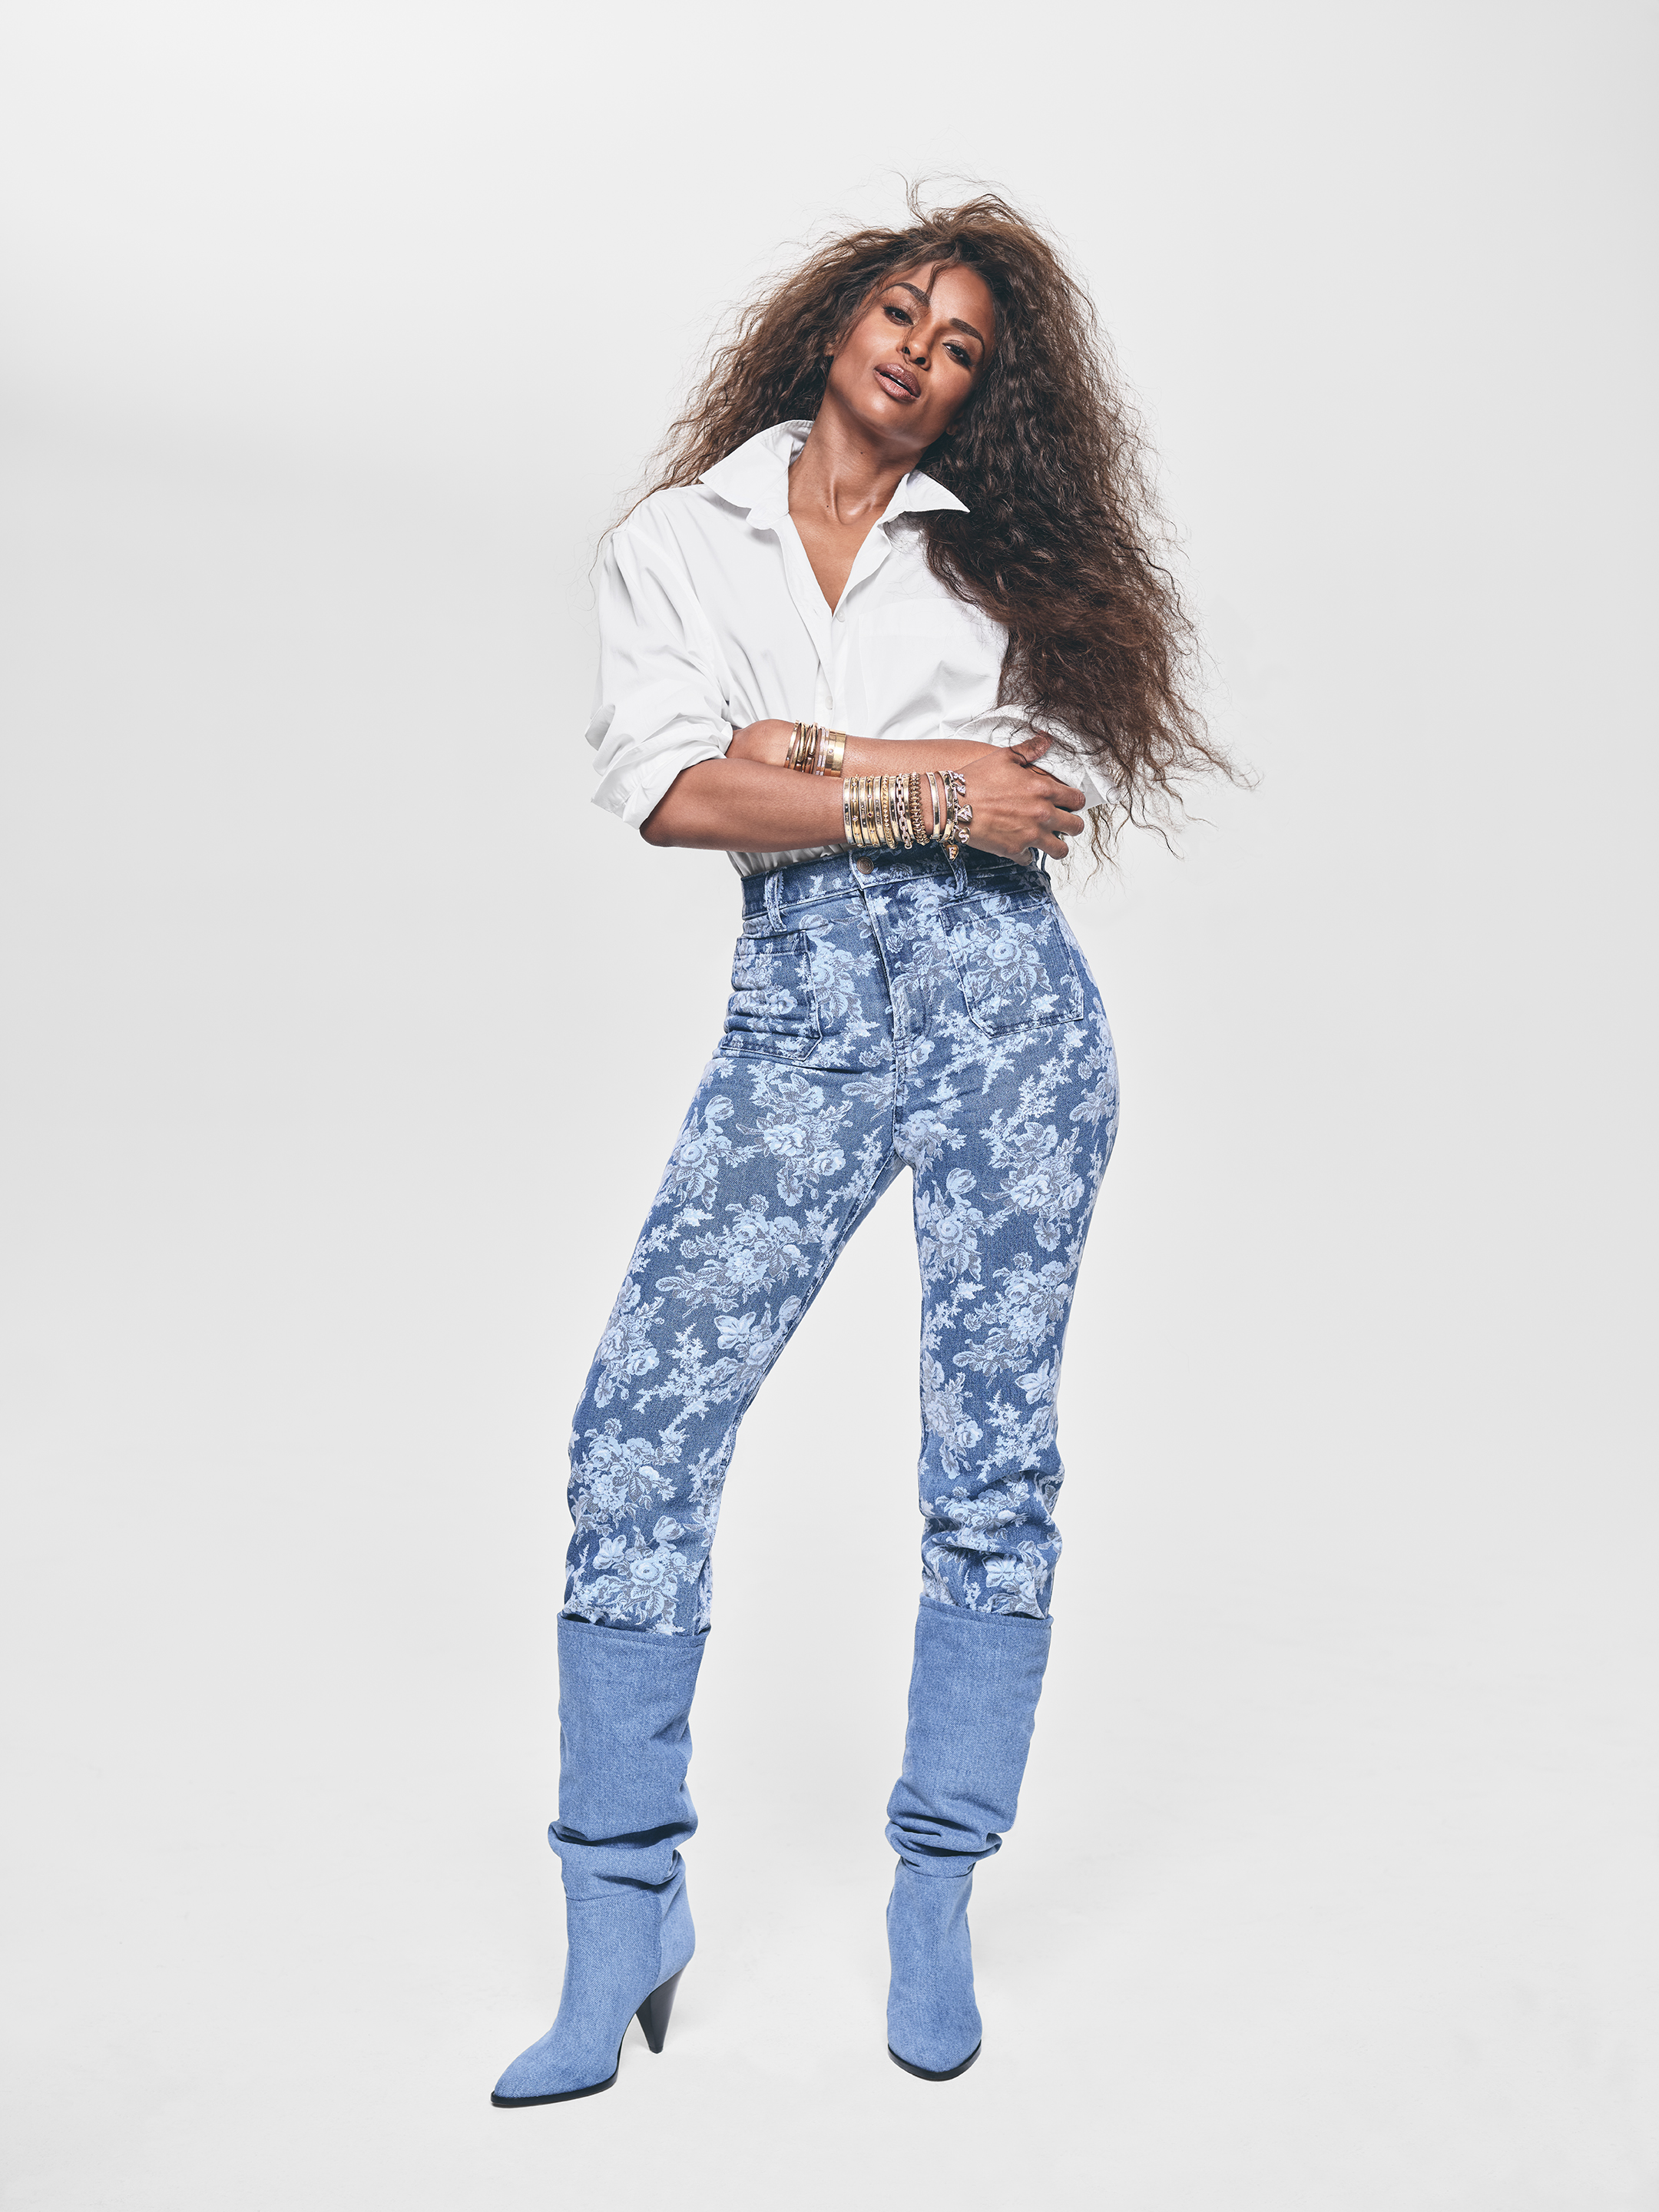 Ciara in floral jeans